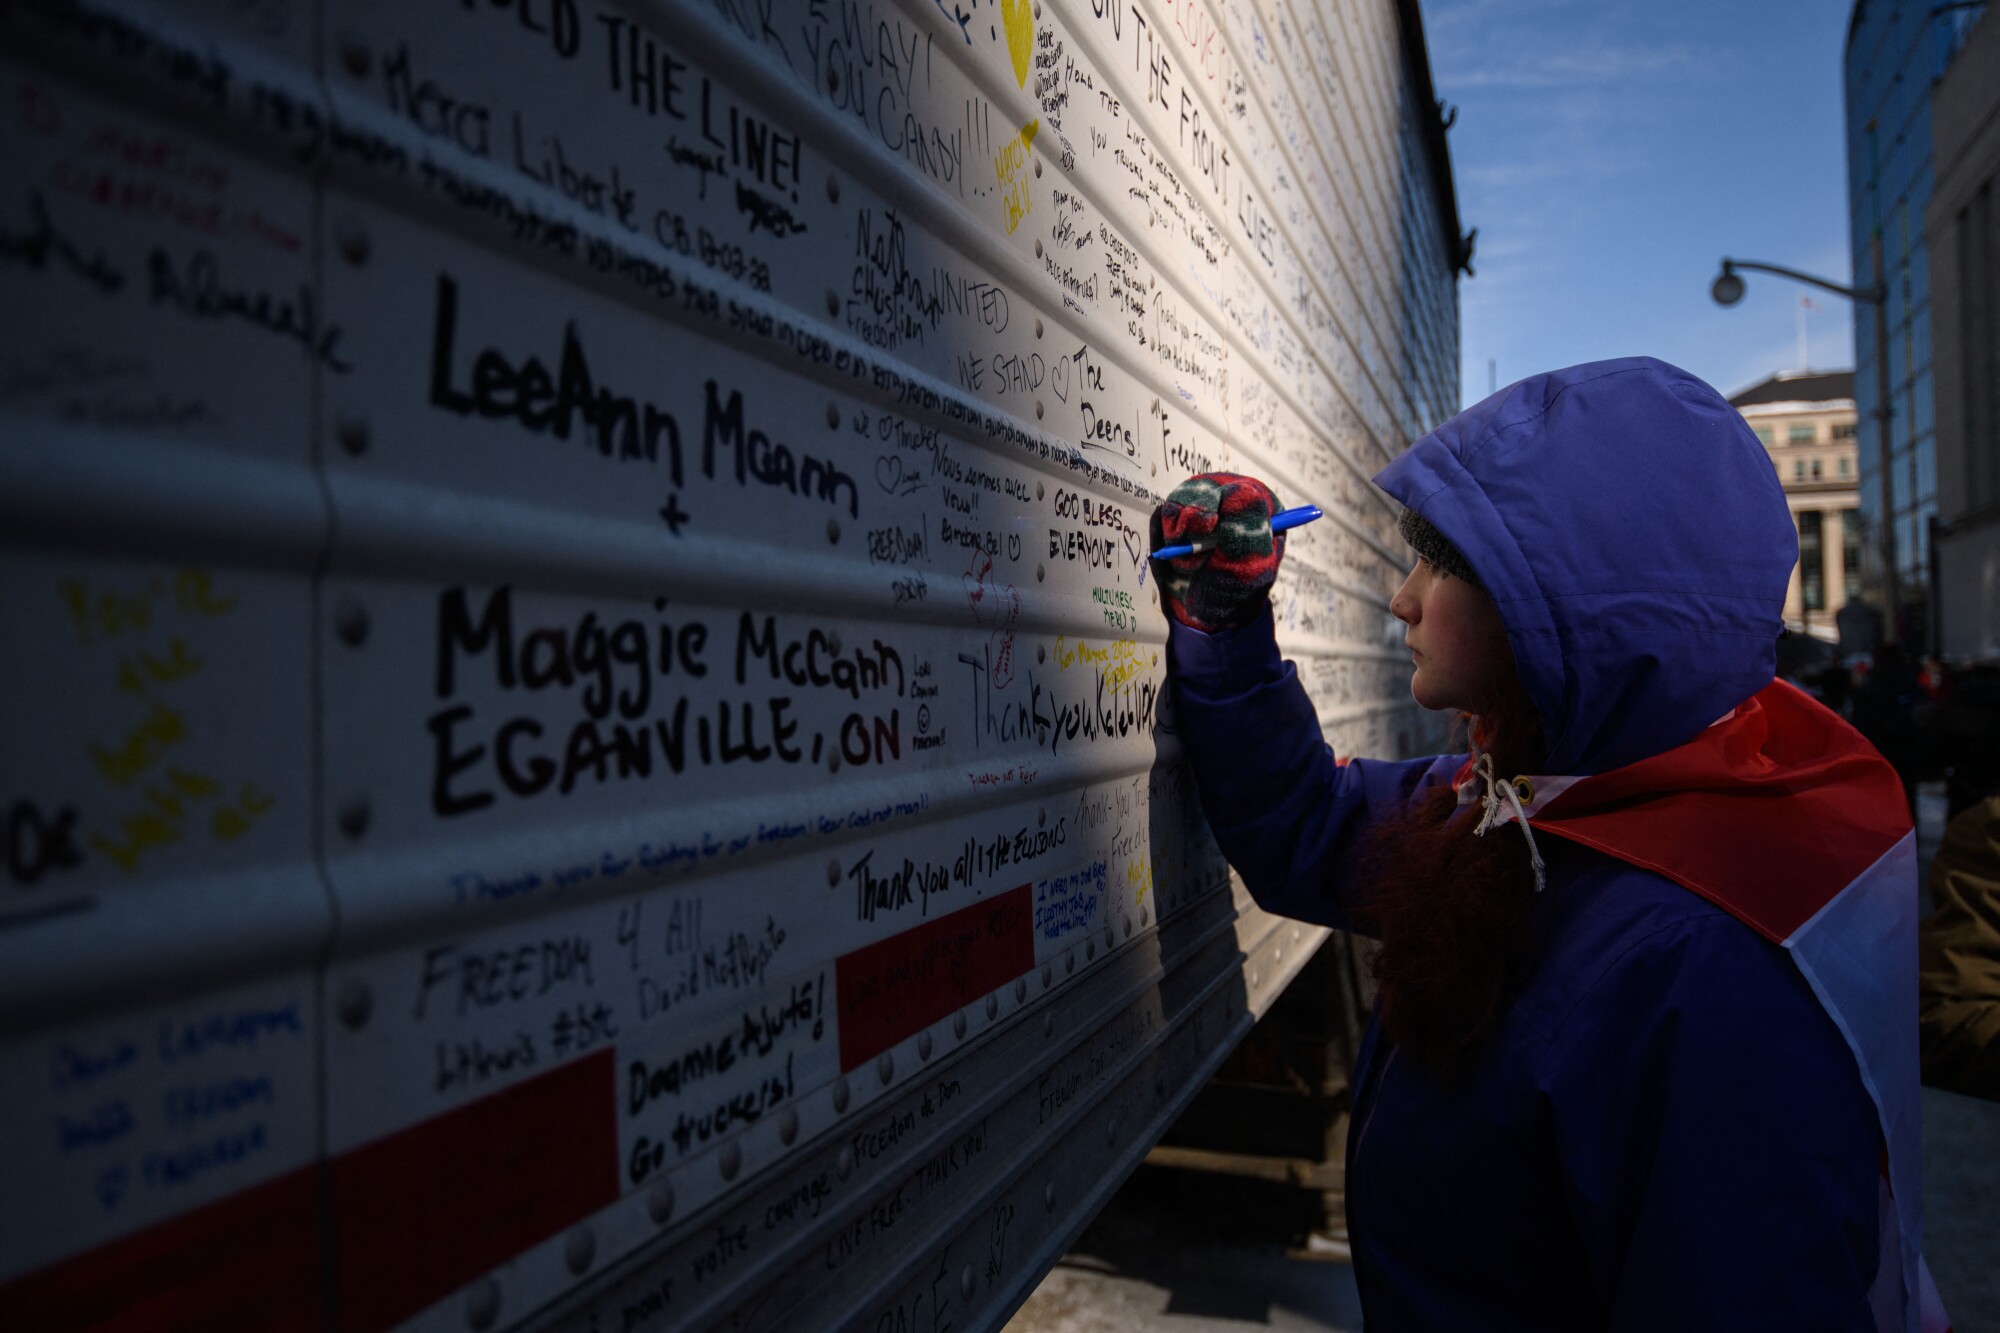 A person writes a message on a truck during a protest by truck drivers over Covid-19 pandemic health rules in Ottawa